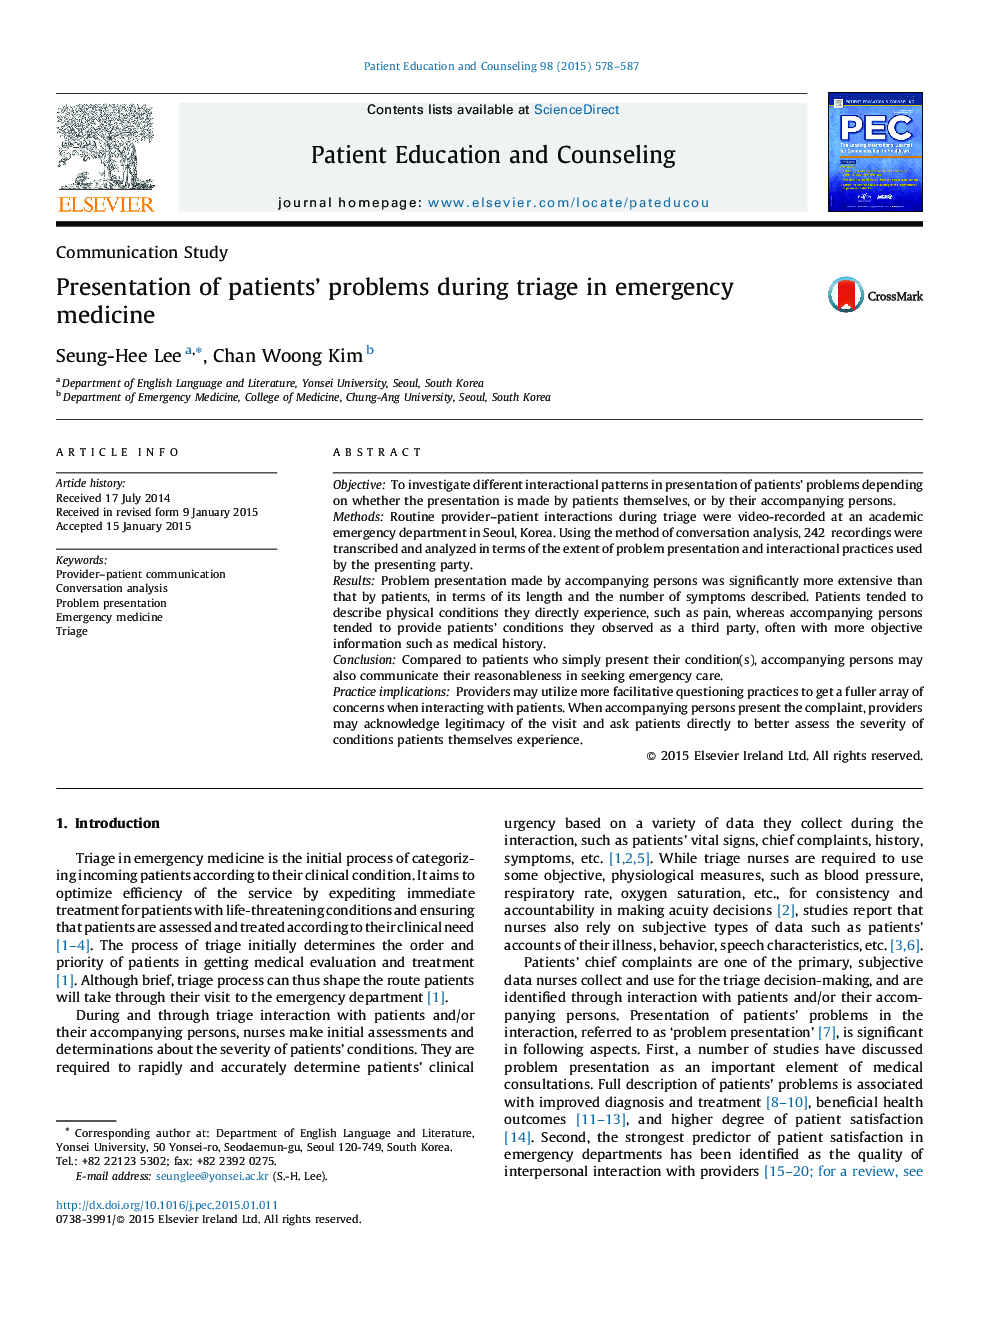 Presentation of patients' problems during triage in emergency medicine